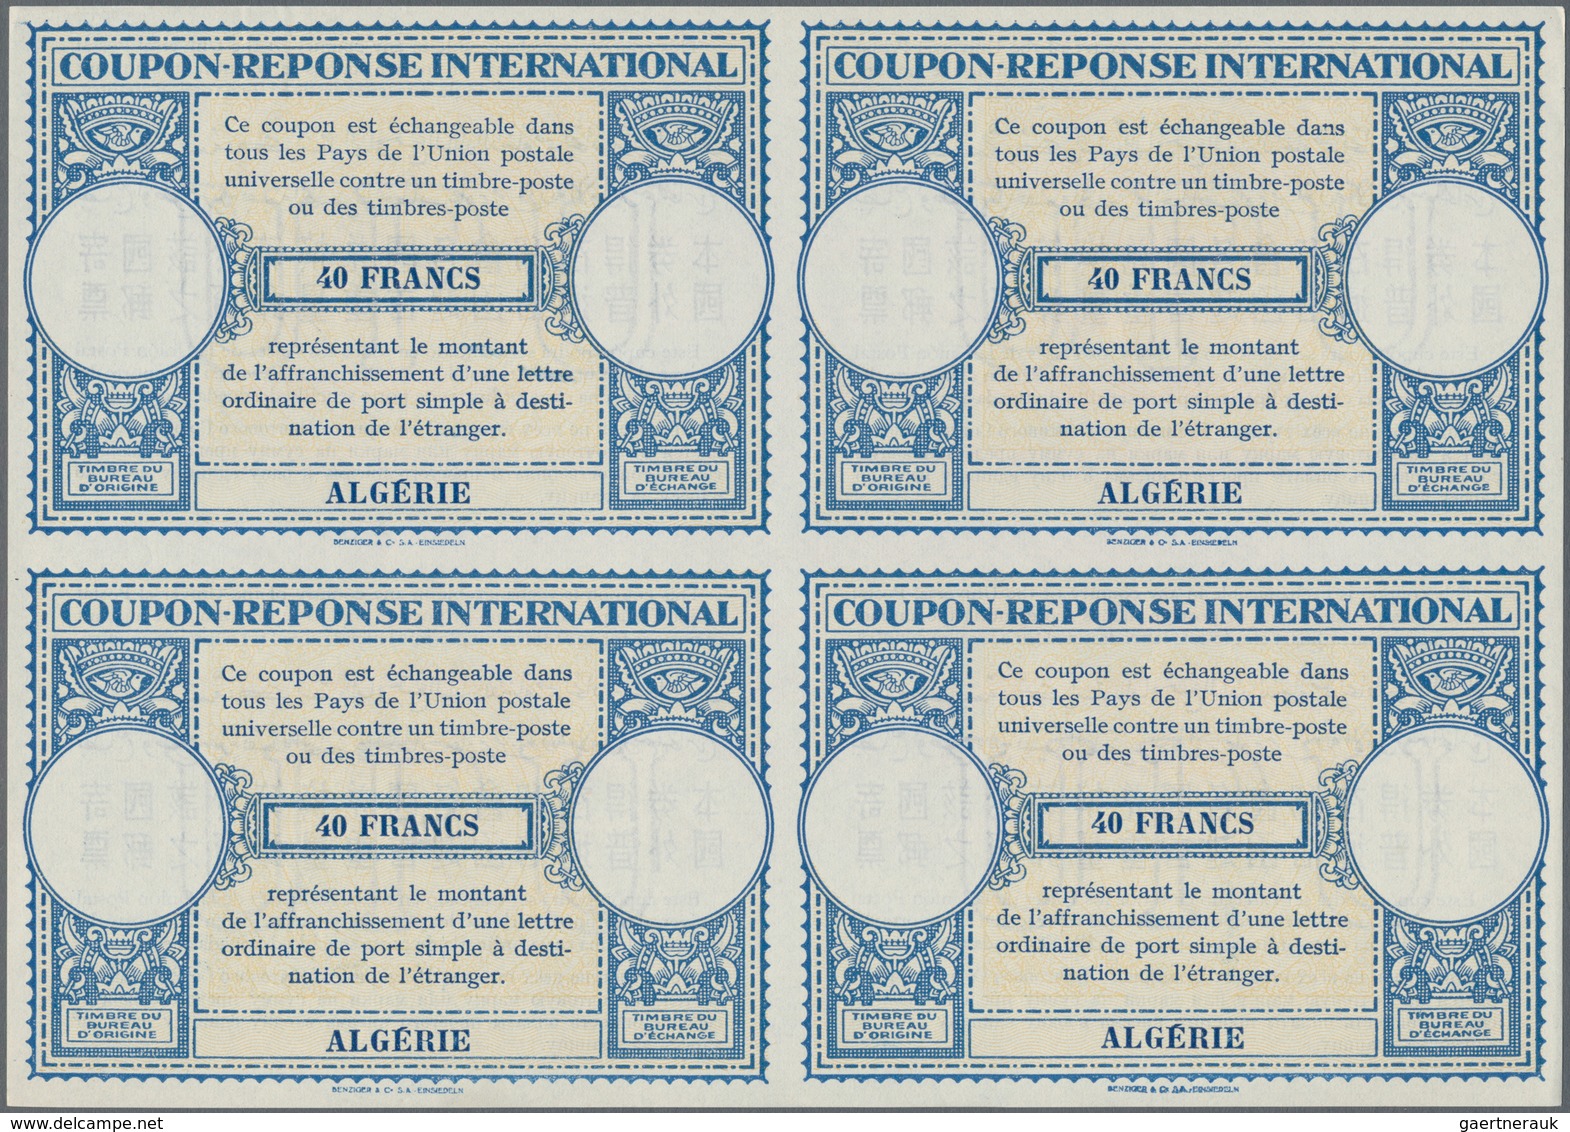 Algerien: 1952, January. International Reply Coupon 40 Francs (London Type) In An Unused Block Of 4. - Covers & Documents